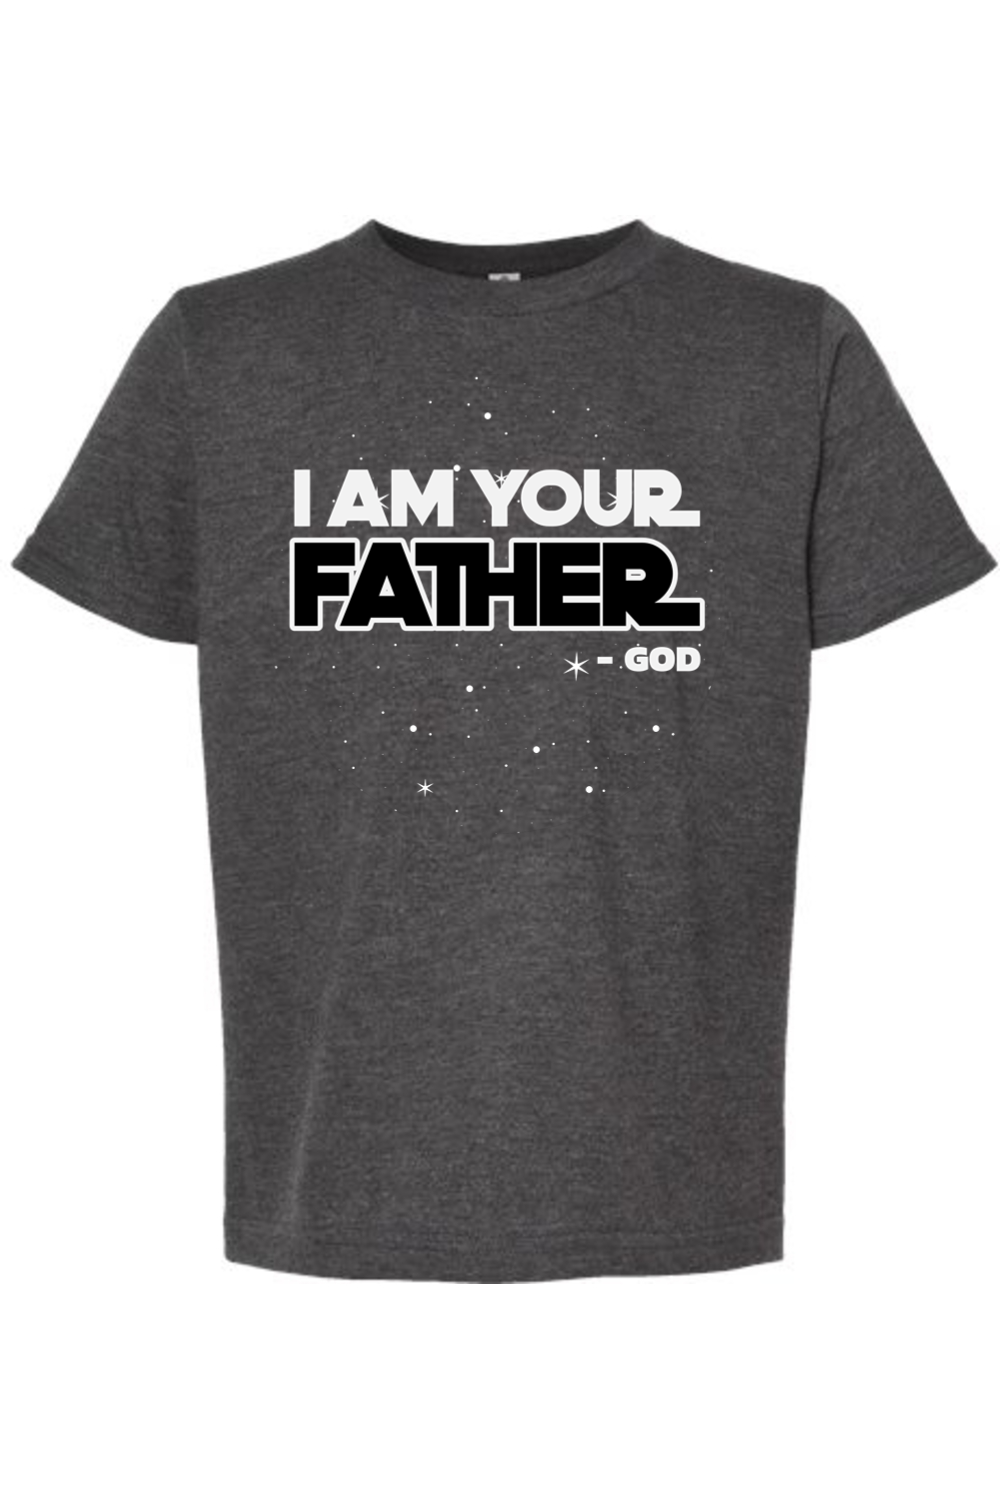 I'm Your Father (Star Ware Parody) - Kids T-Shirt